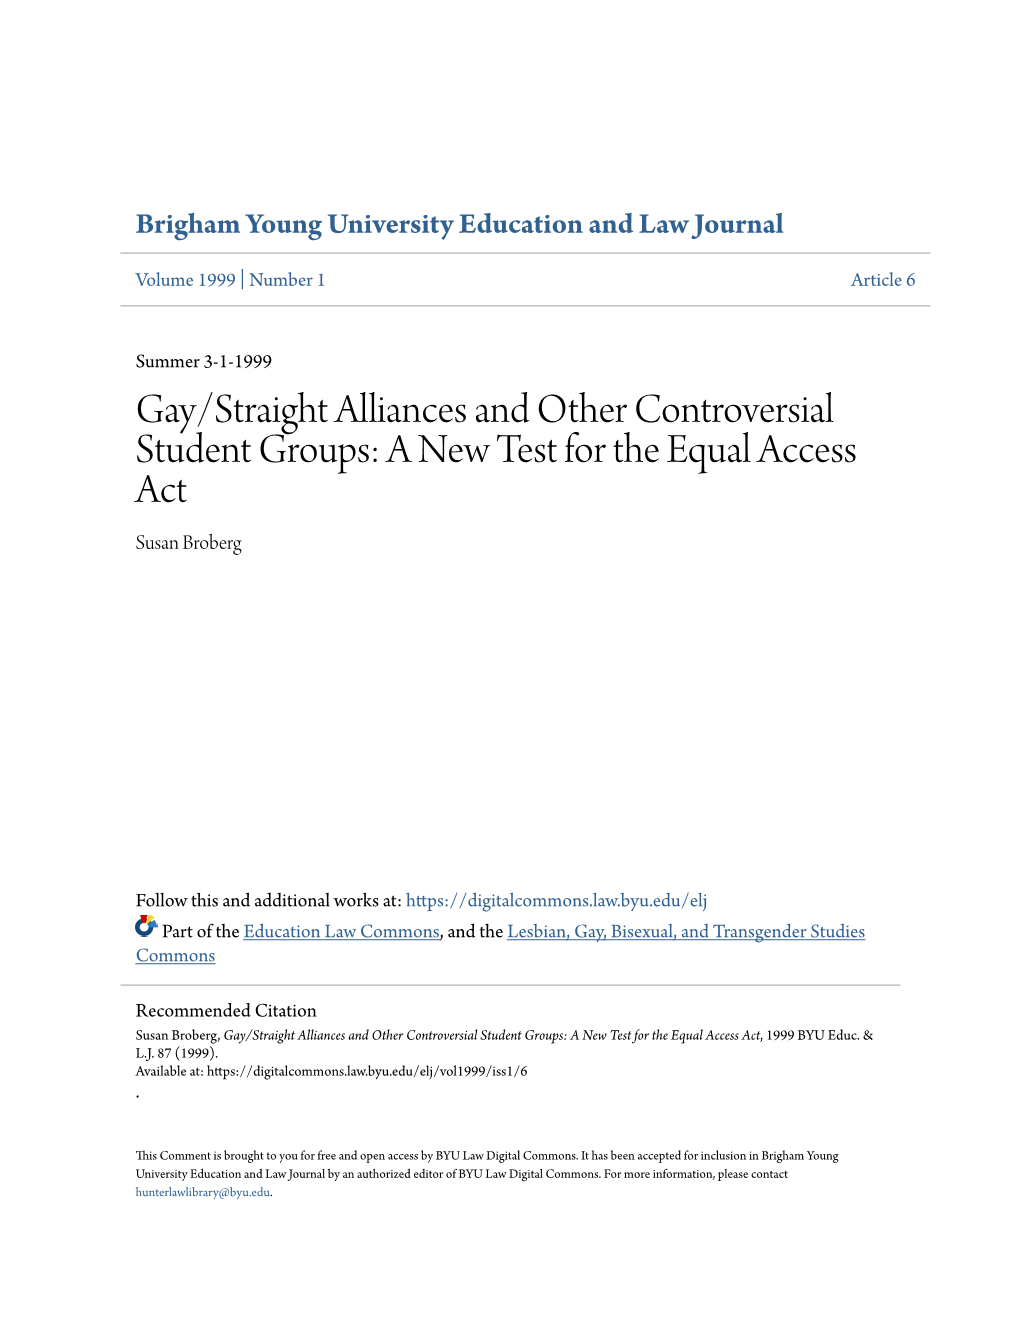 Gay/Straight Alliances and Other Controversial Student Groups: a New Test for the Equal Access Act Susan Broberg